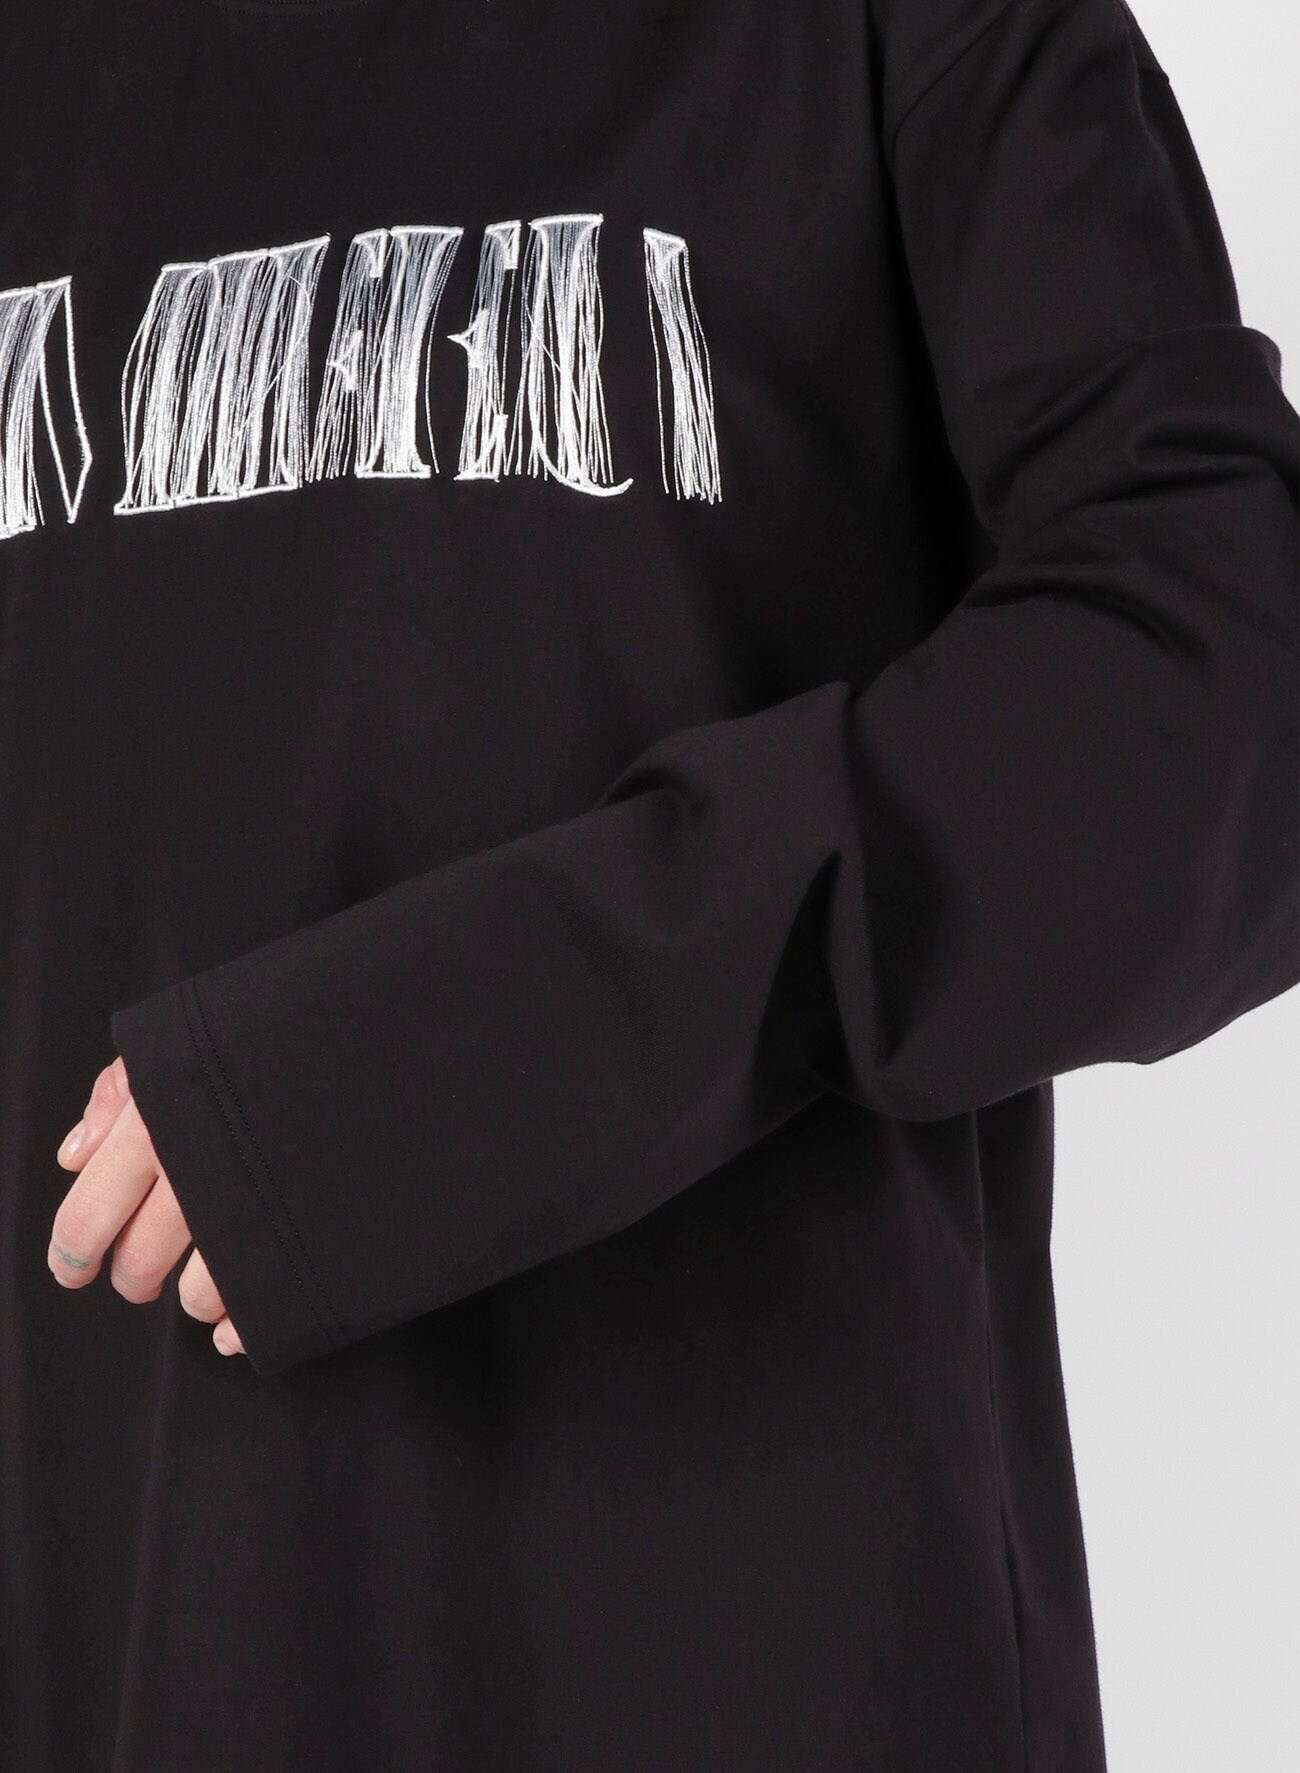 LIMI FEU Embroidery Oversize Long T(S Black): Vintage 1.1｜THE